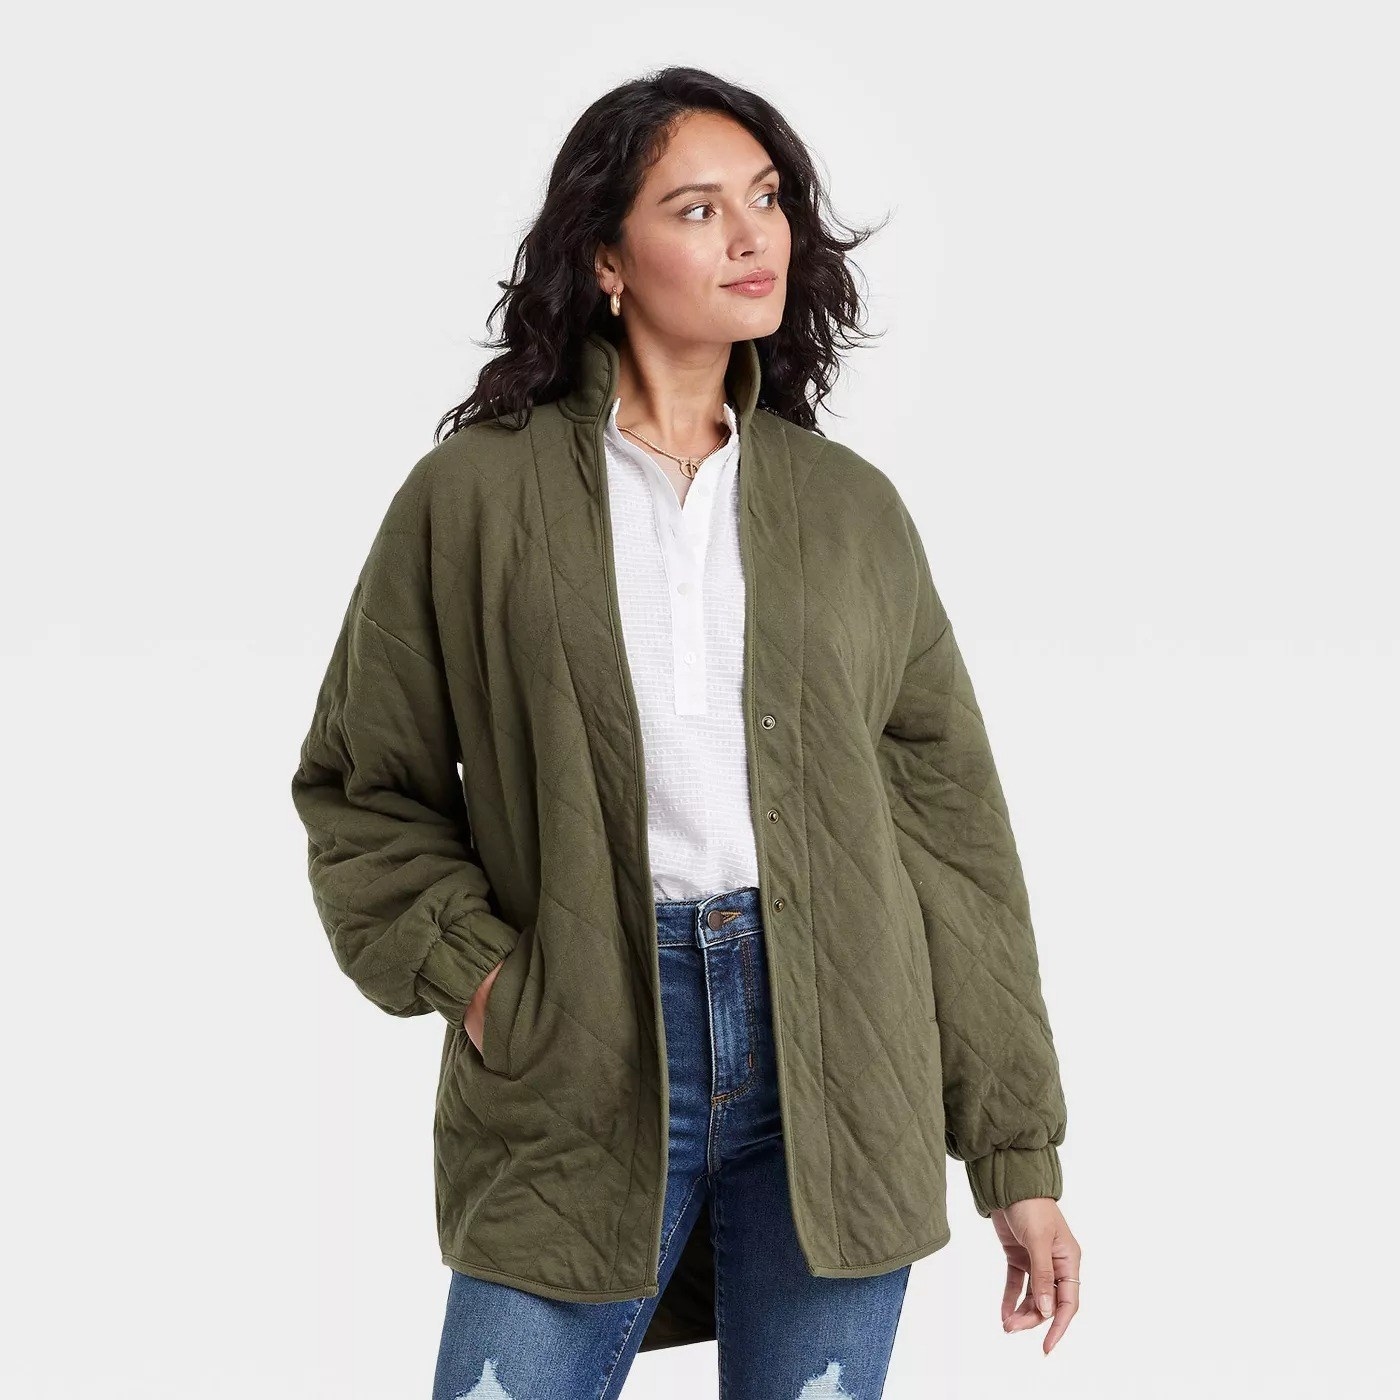 Model wearing green jacket with elastic sleeves, goes past the hip